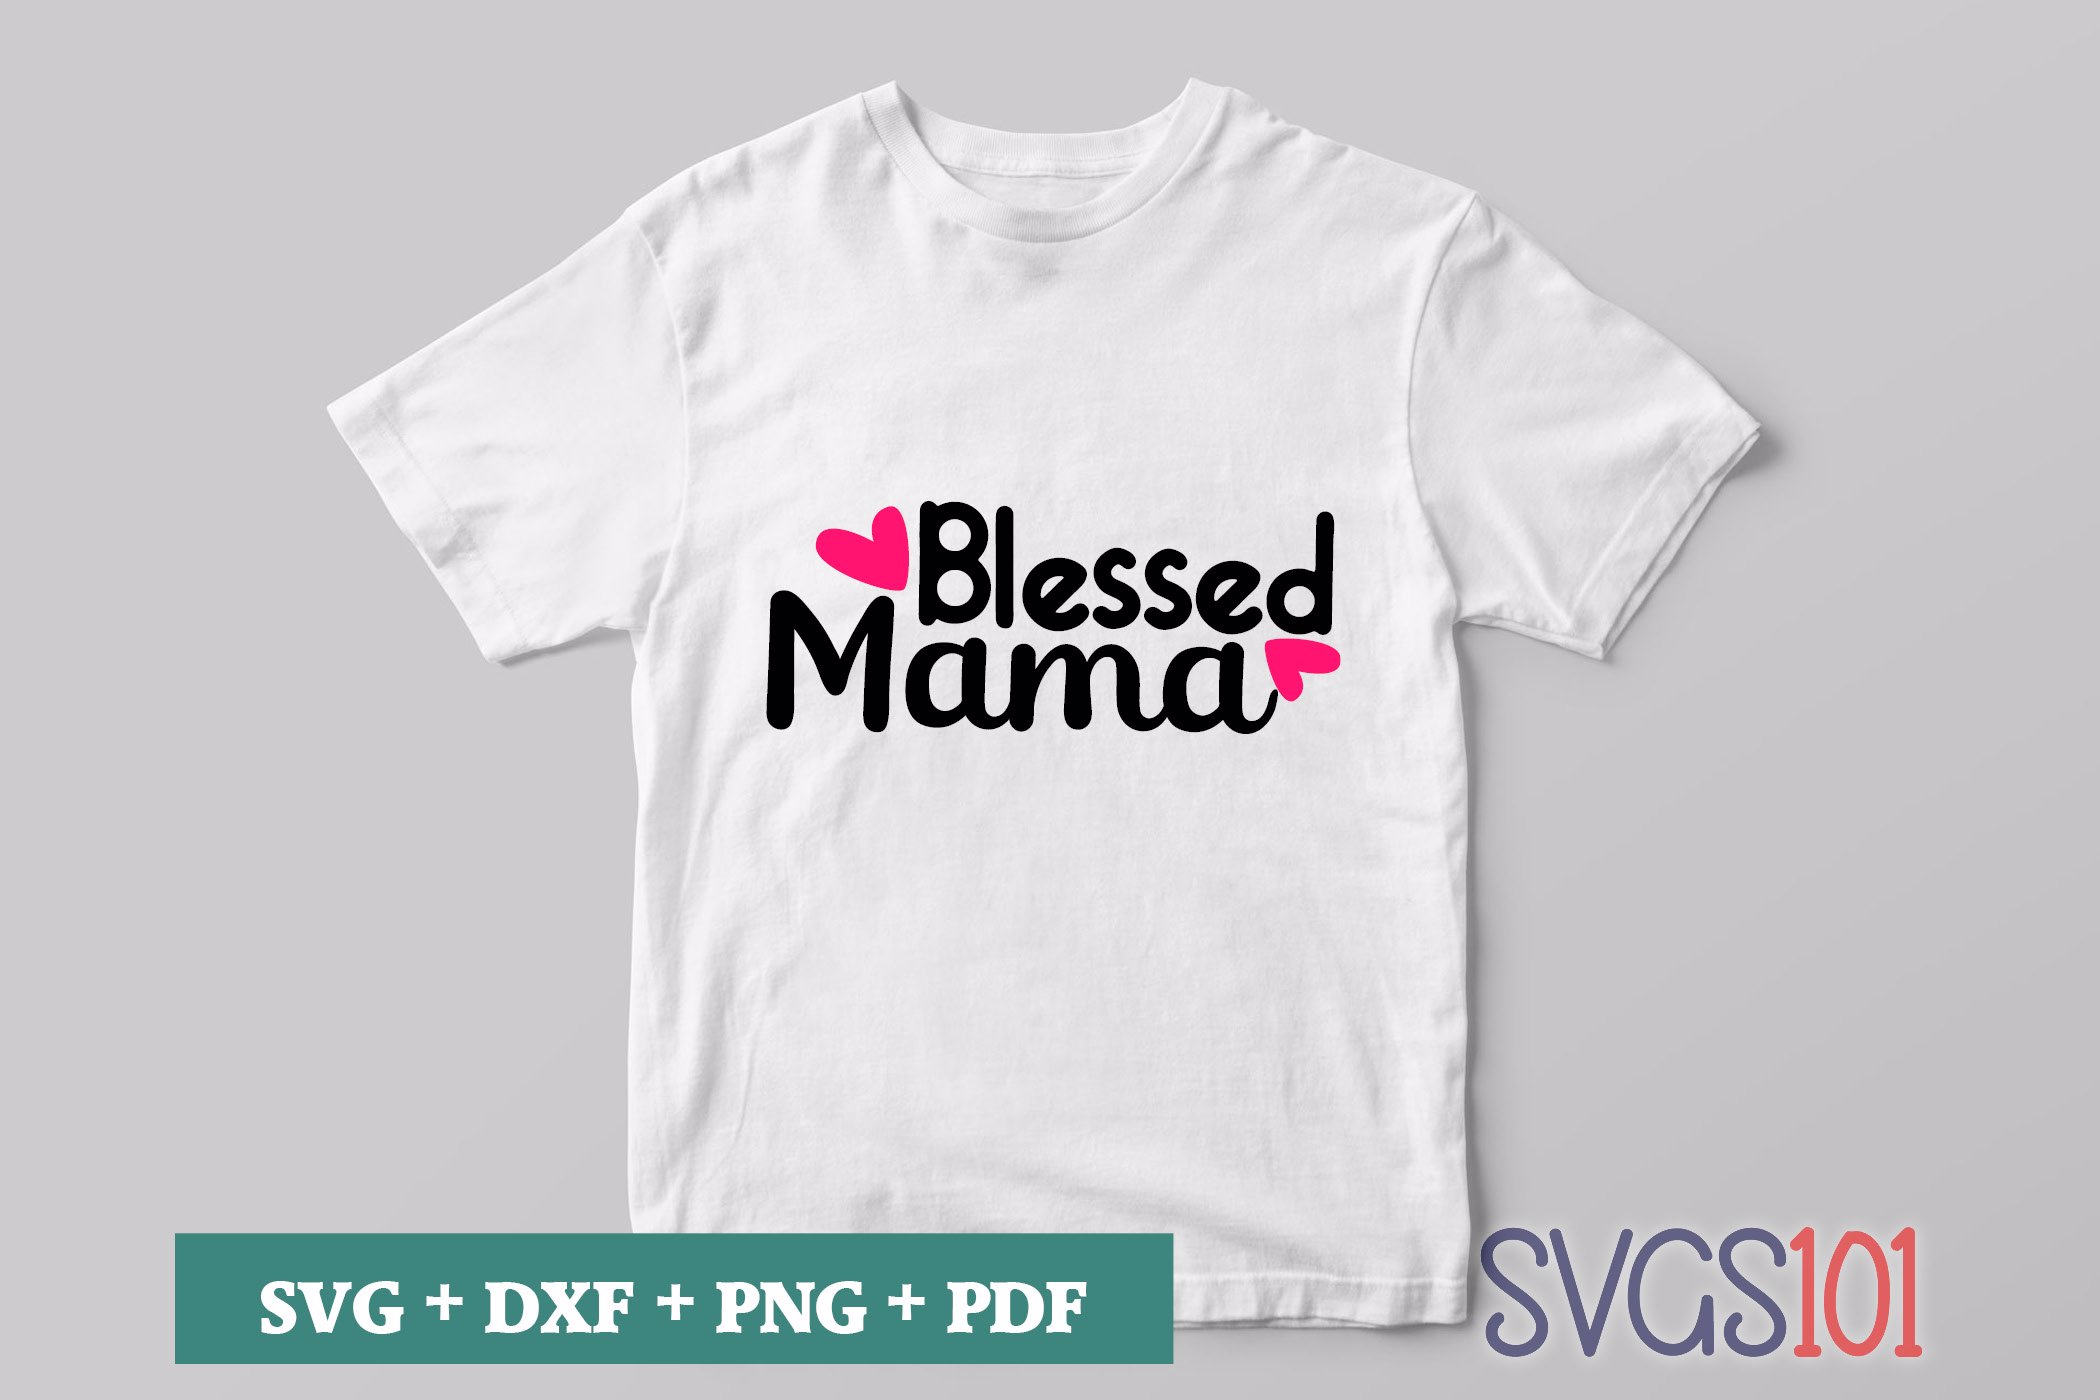 Blessed mama